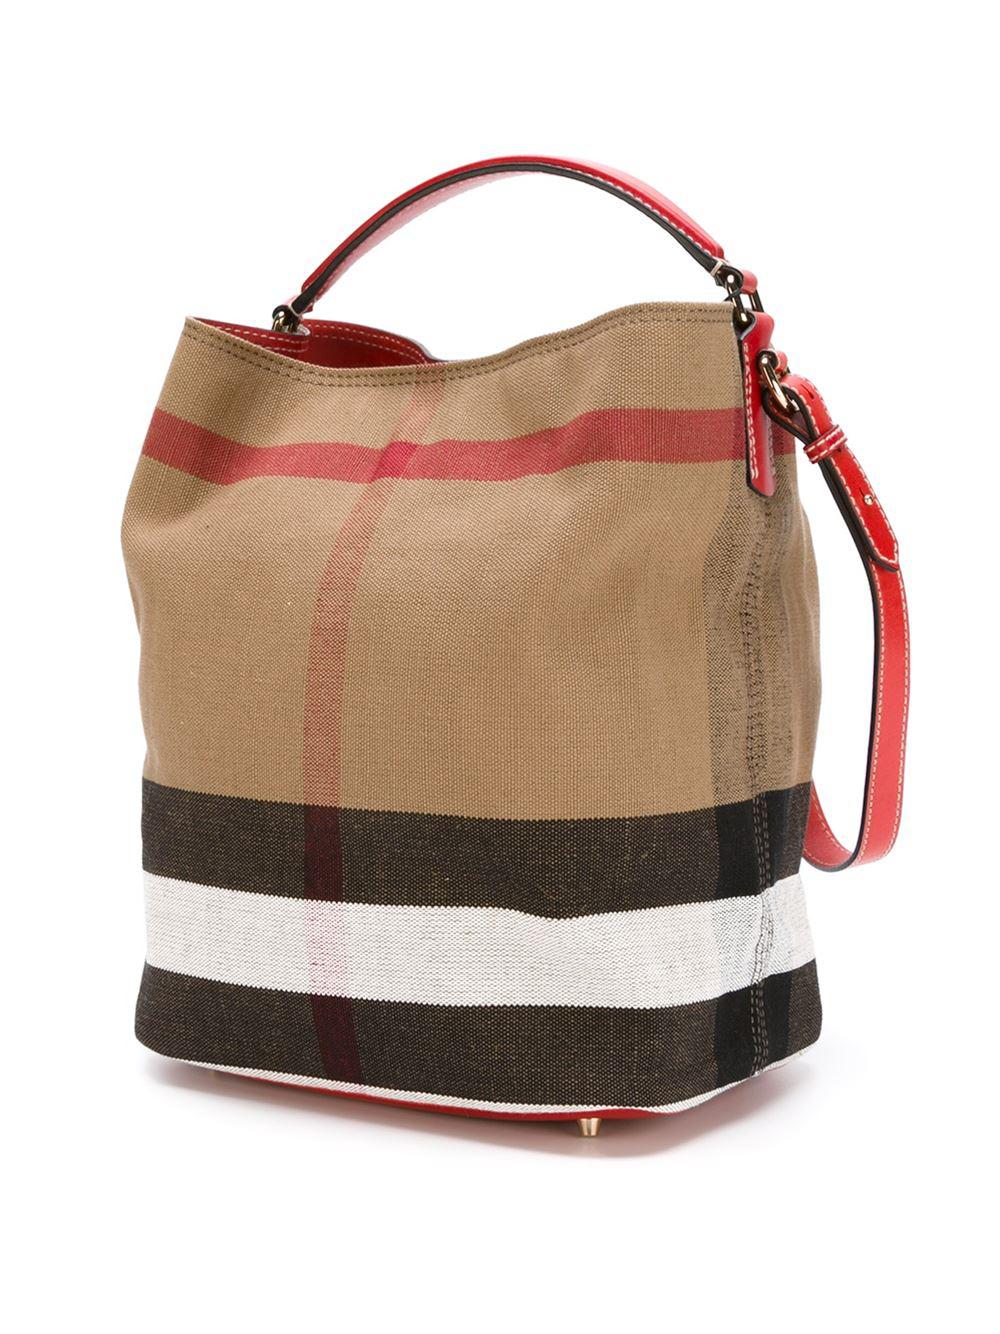 Lyst - Burberry Large Ashby Cotton, Jute and Leather Shoulder Bag in Red